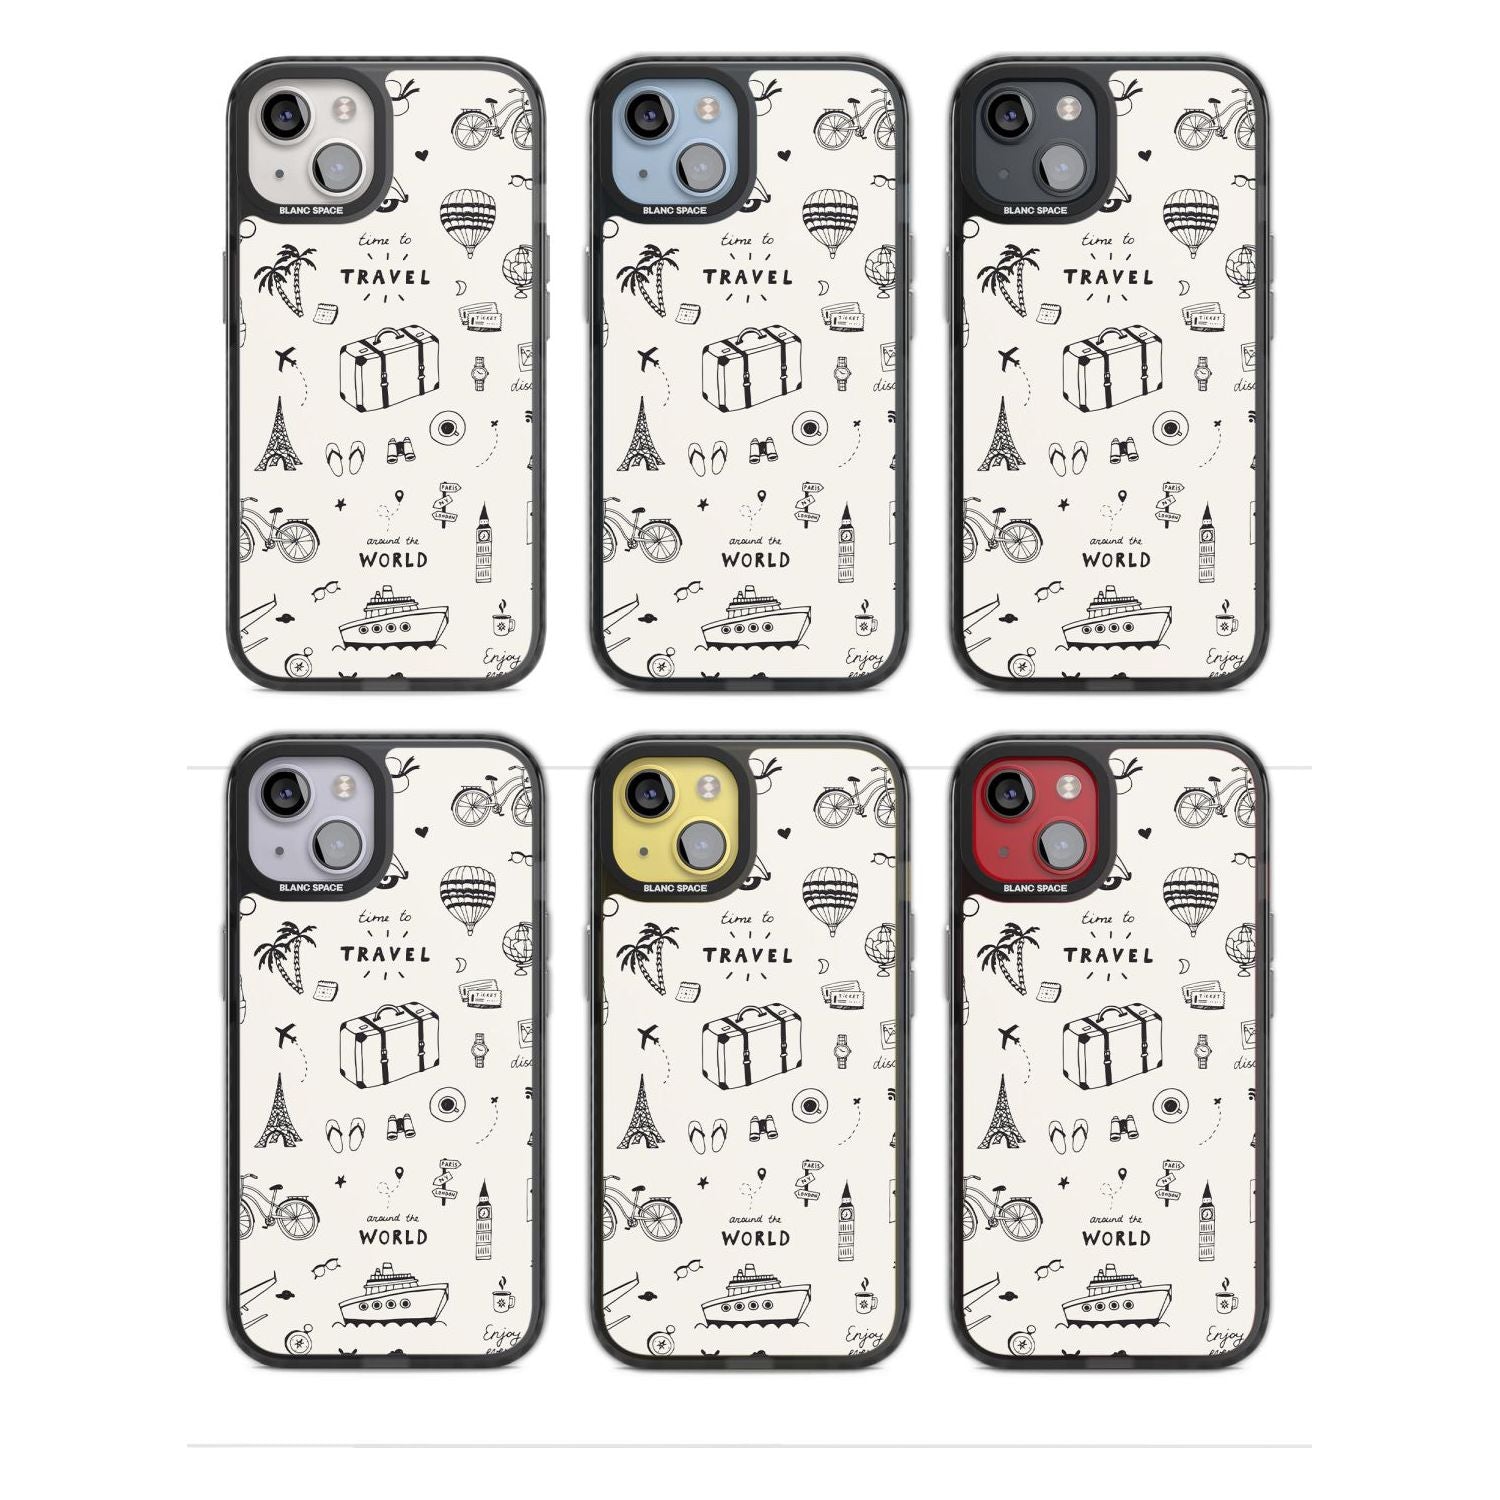 Cute Travel Pattern, White on Phone Case iPhone 15 Pro Max / Black Impact Case,iPhone 15 Plus / Black Impact Case,iPhone 15 Pro / Black Impact Case,iPhone 15 / Black Impact Case,iPhone 15 Pro Max / Impact Case,iPhone 15 Plus / Impact Case,iPhone 15 Pro / Impact Case,iPhone 15 / Impact Case,iPhone 15 Pro Max / Magsafe Black Impact Case,iPhone 15 Plus / Magsafe Black Impact Case,iPhone 15 Pro / Magsafe Black Impact Case,iPhone 15 / Magsafe Black Impact Case,iPhone 14 Pro Max / Black Impact Case,iPhone 14 Plus